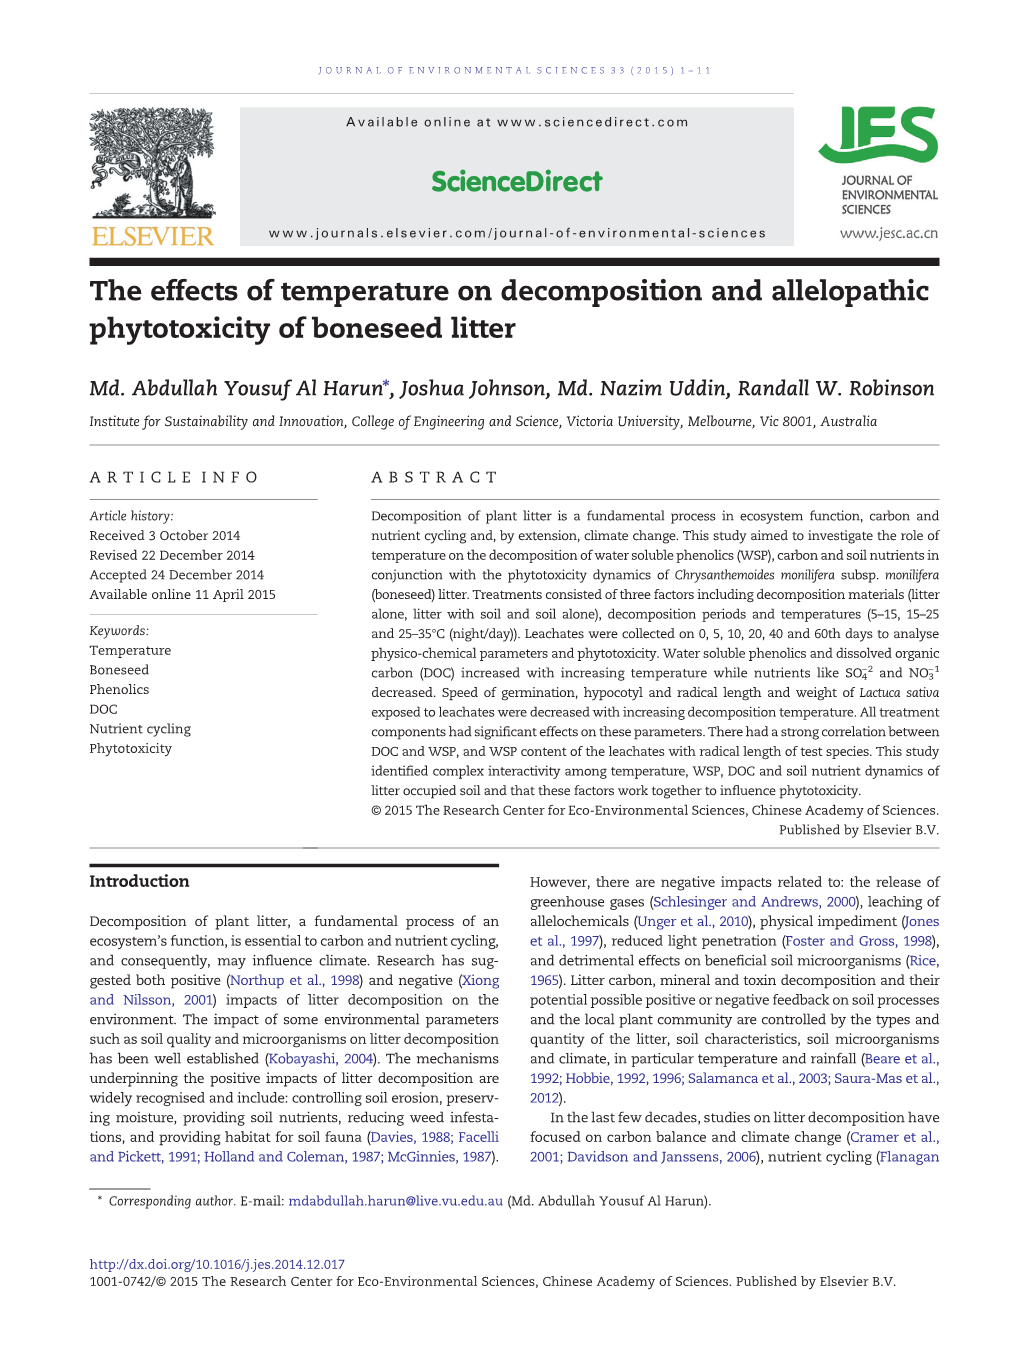 The Effects of Temperature on Decomposition and Allelopathic Phytotoxicity of Boneseed Litter